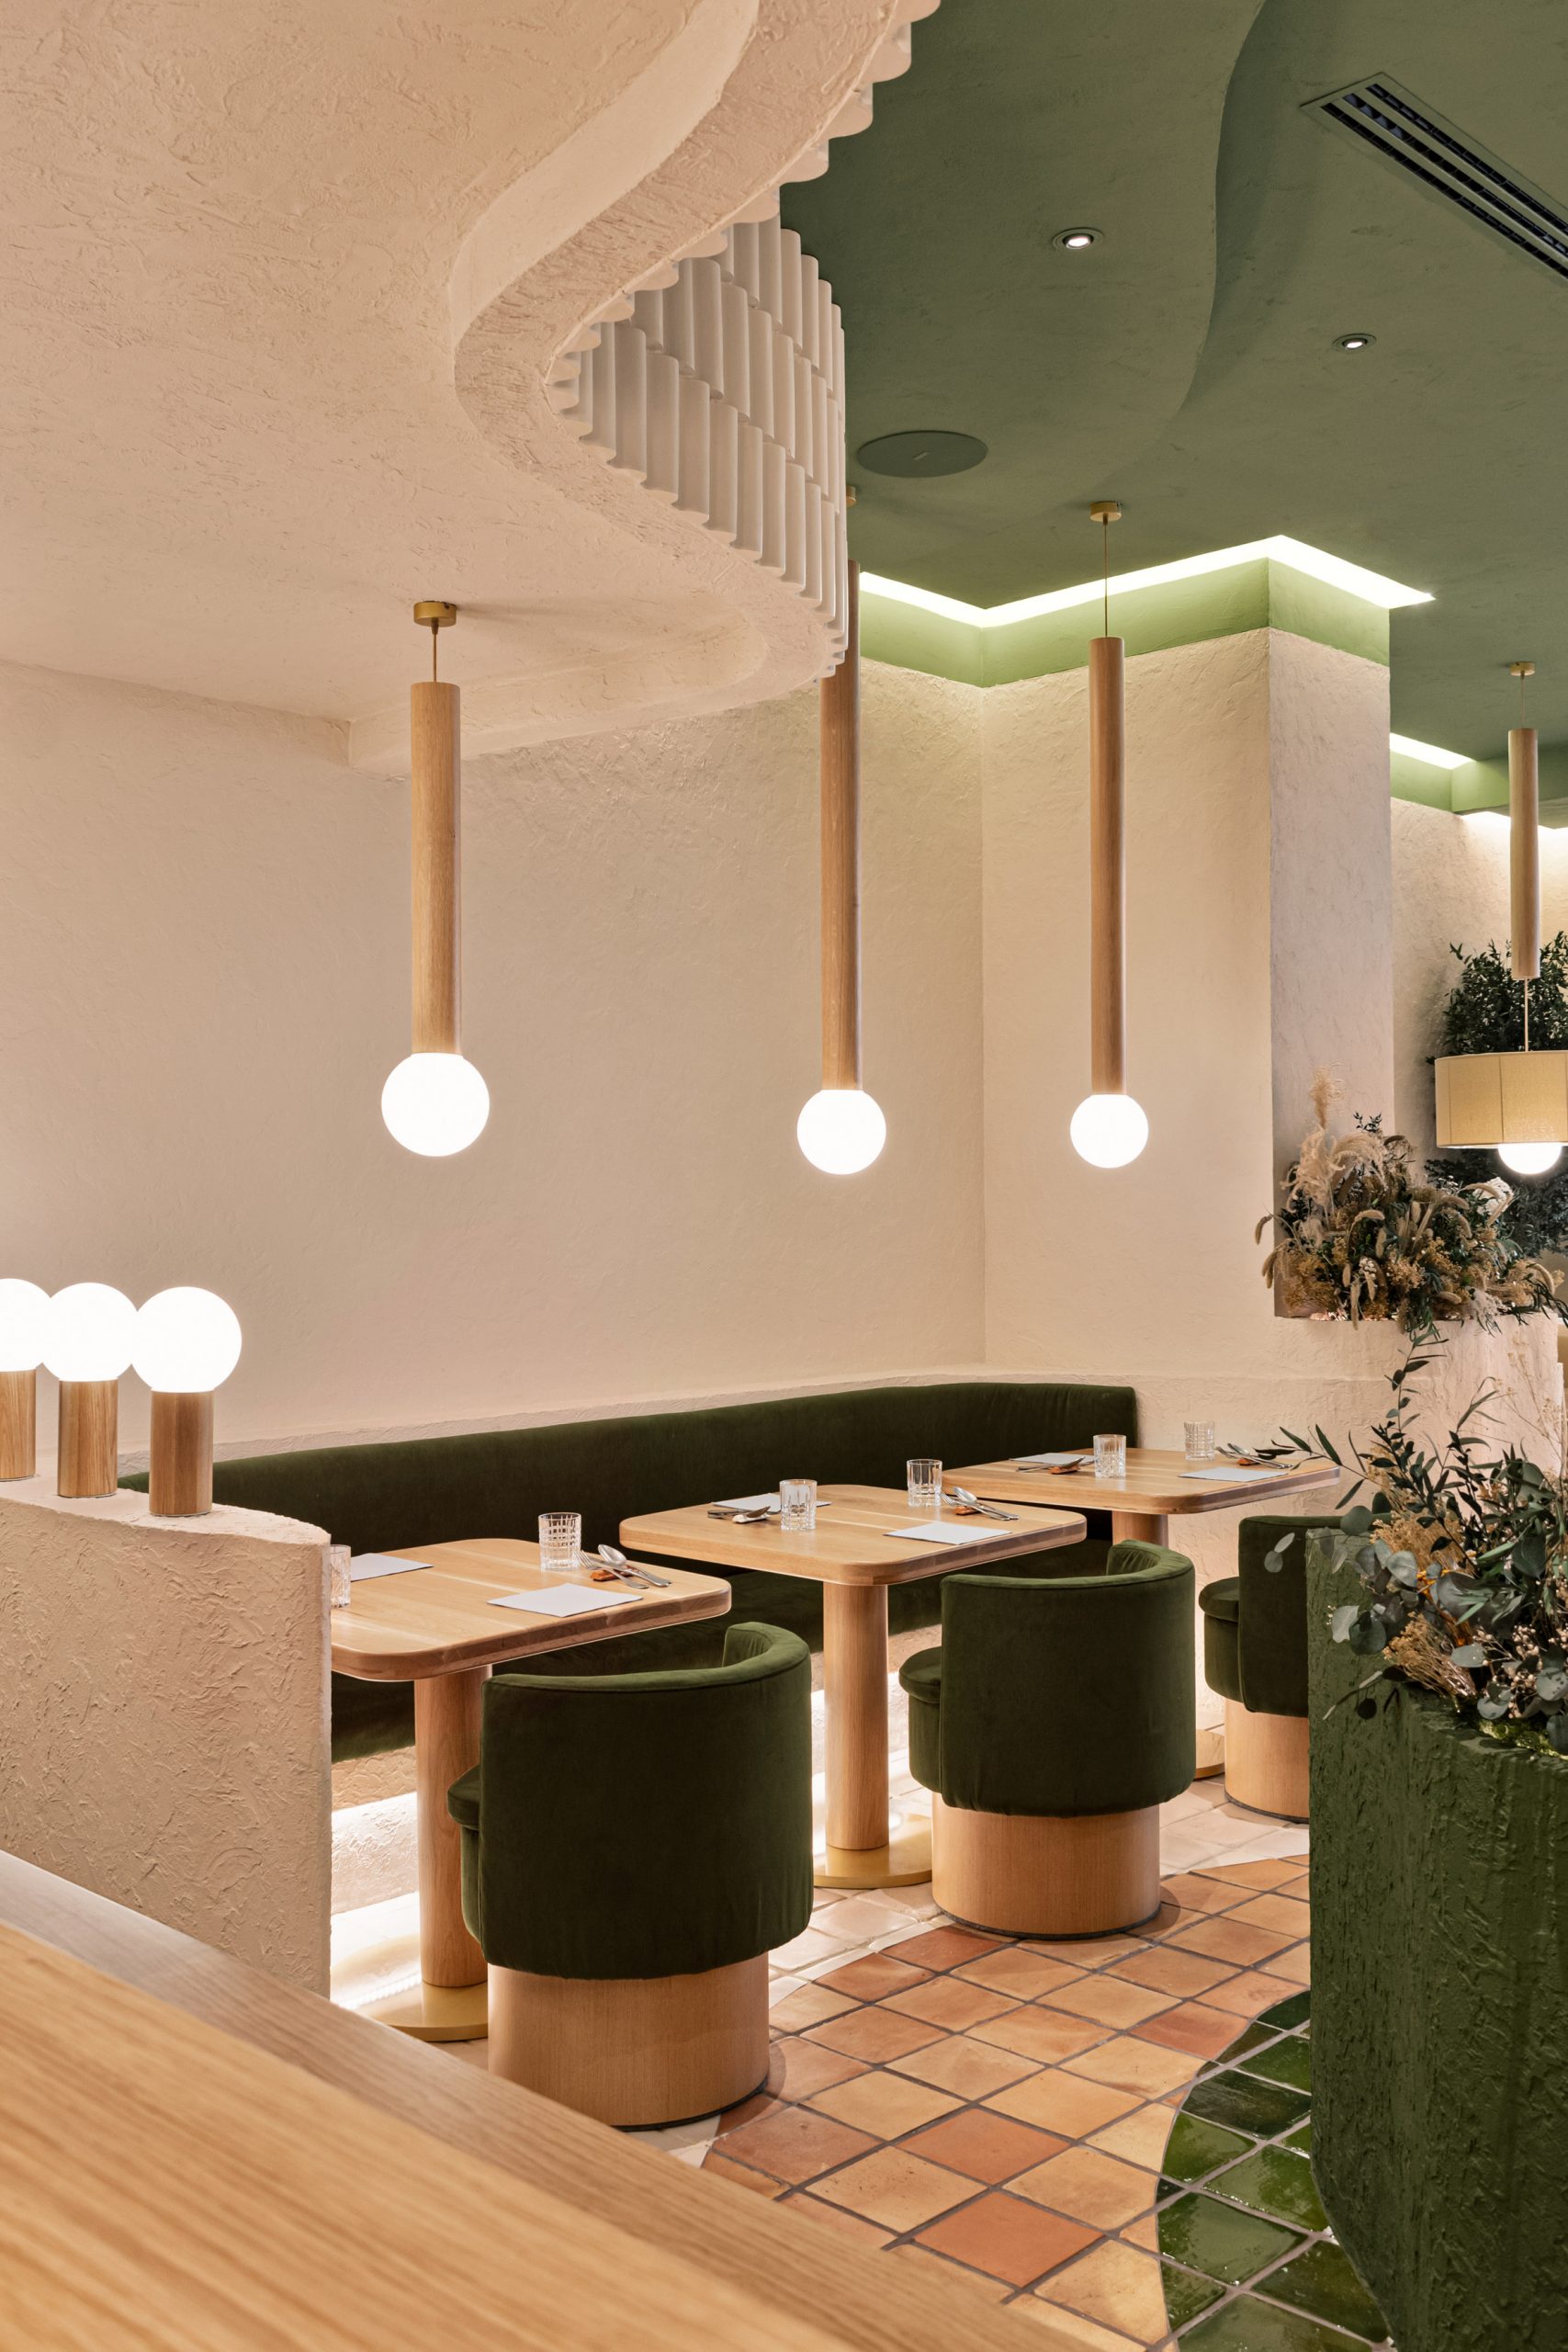 Masquespacio injected green accents into the restaurant